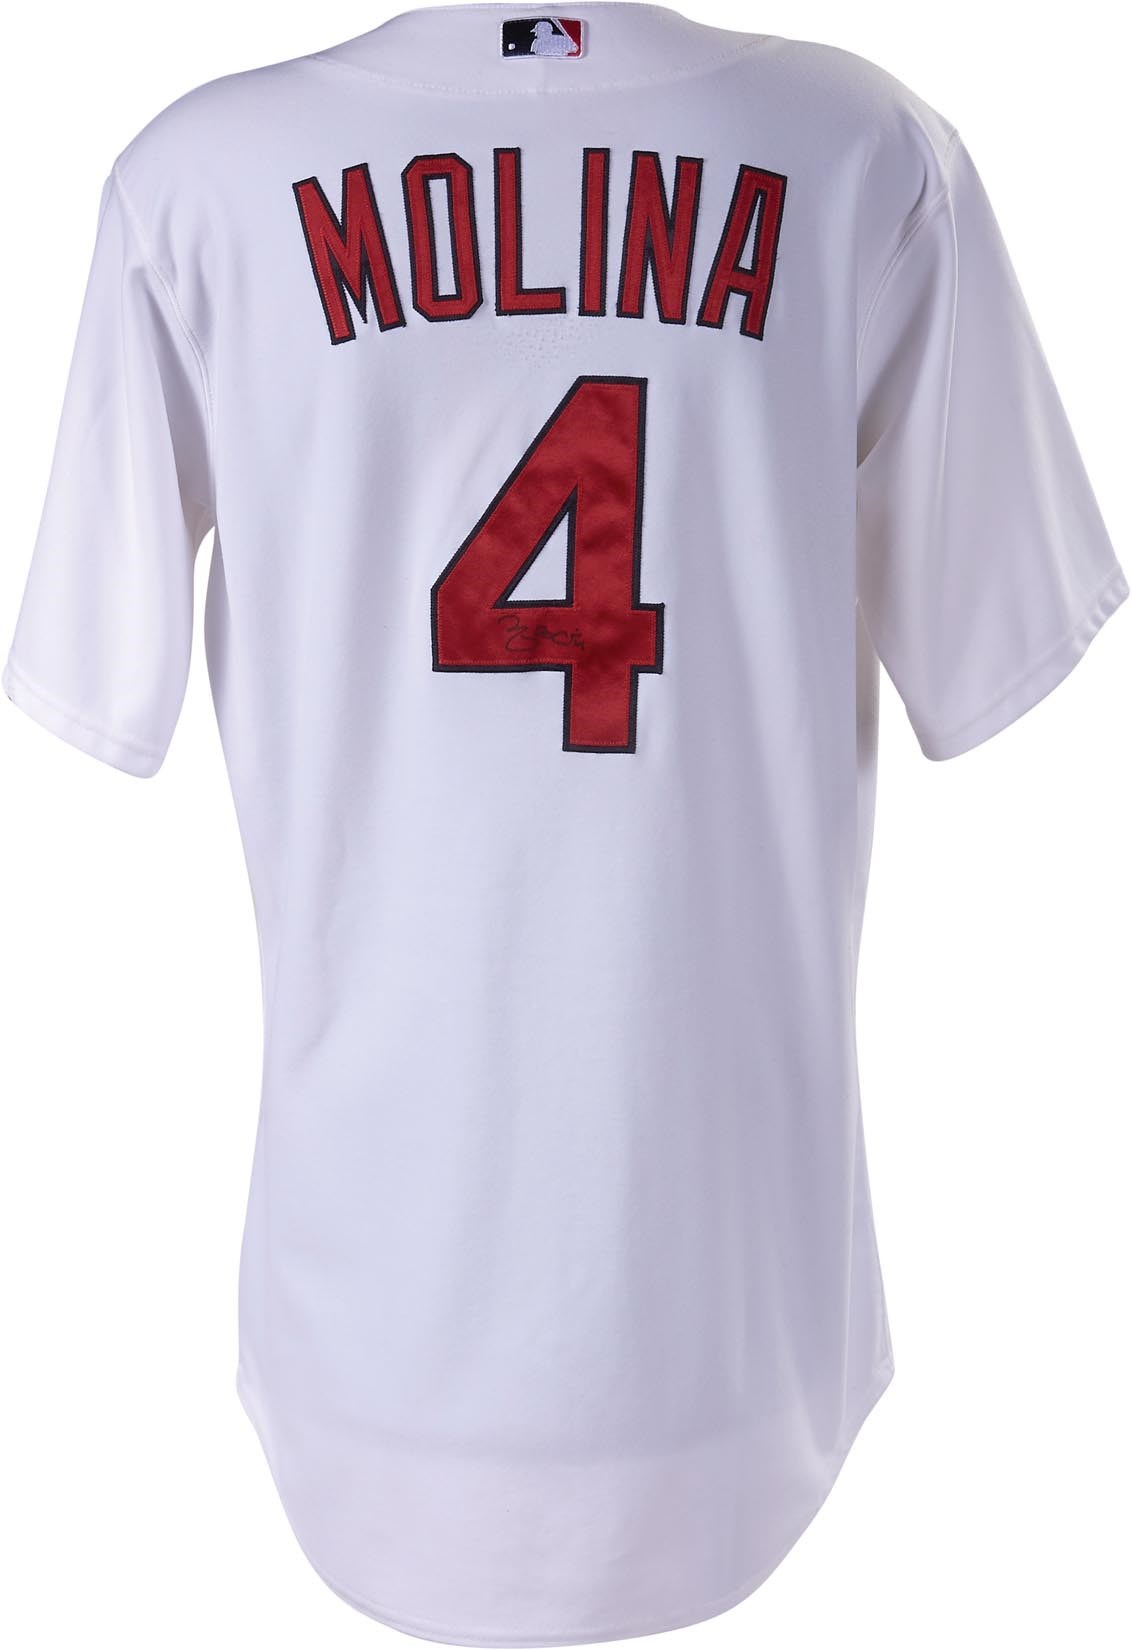 St. Louis Cardinals - 2015 Yadier Molina Opening Day Home Run #1 Signed Game Worn Jersey (PSA, MLB Auth. & Photo-Matched)